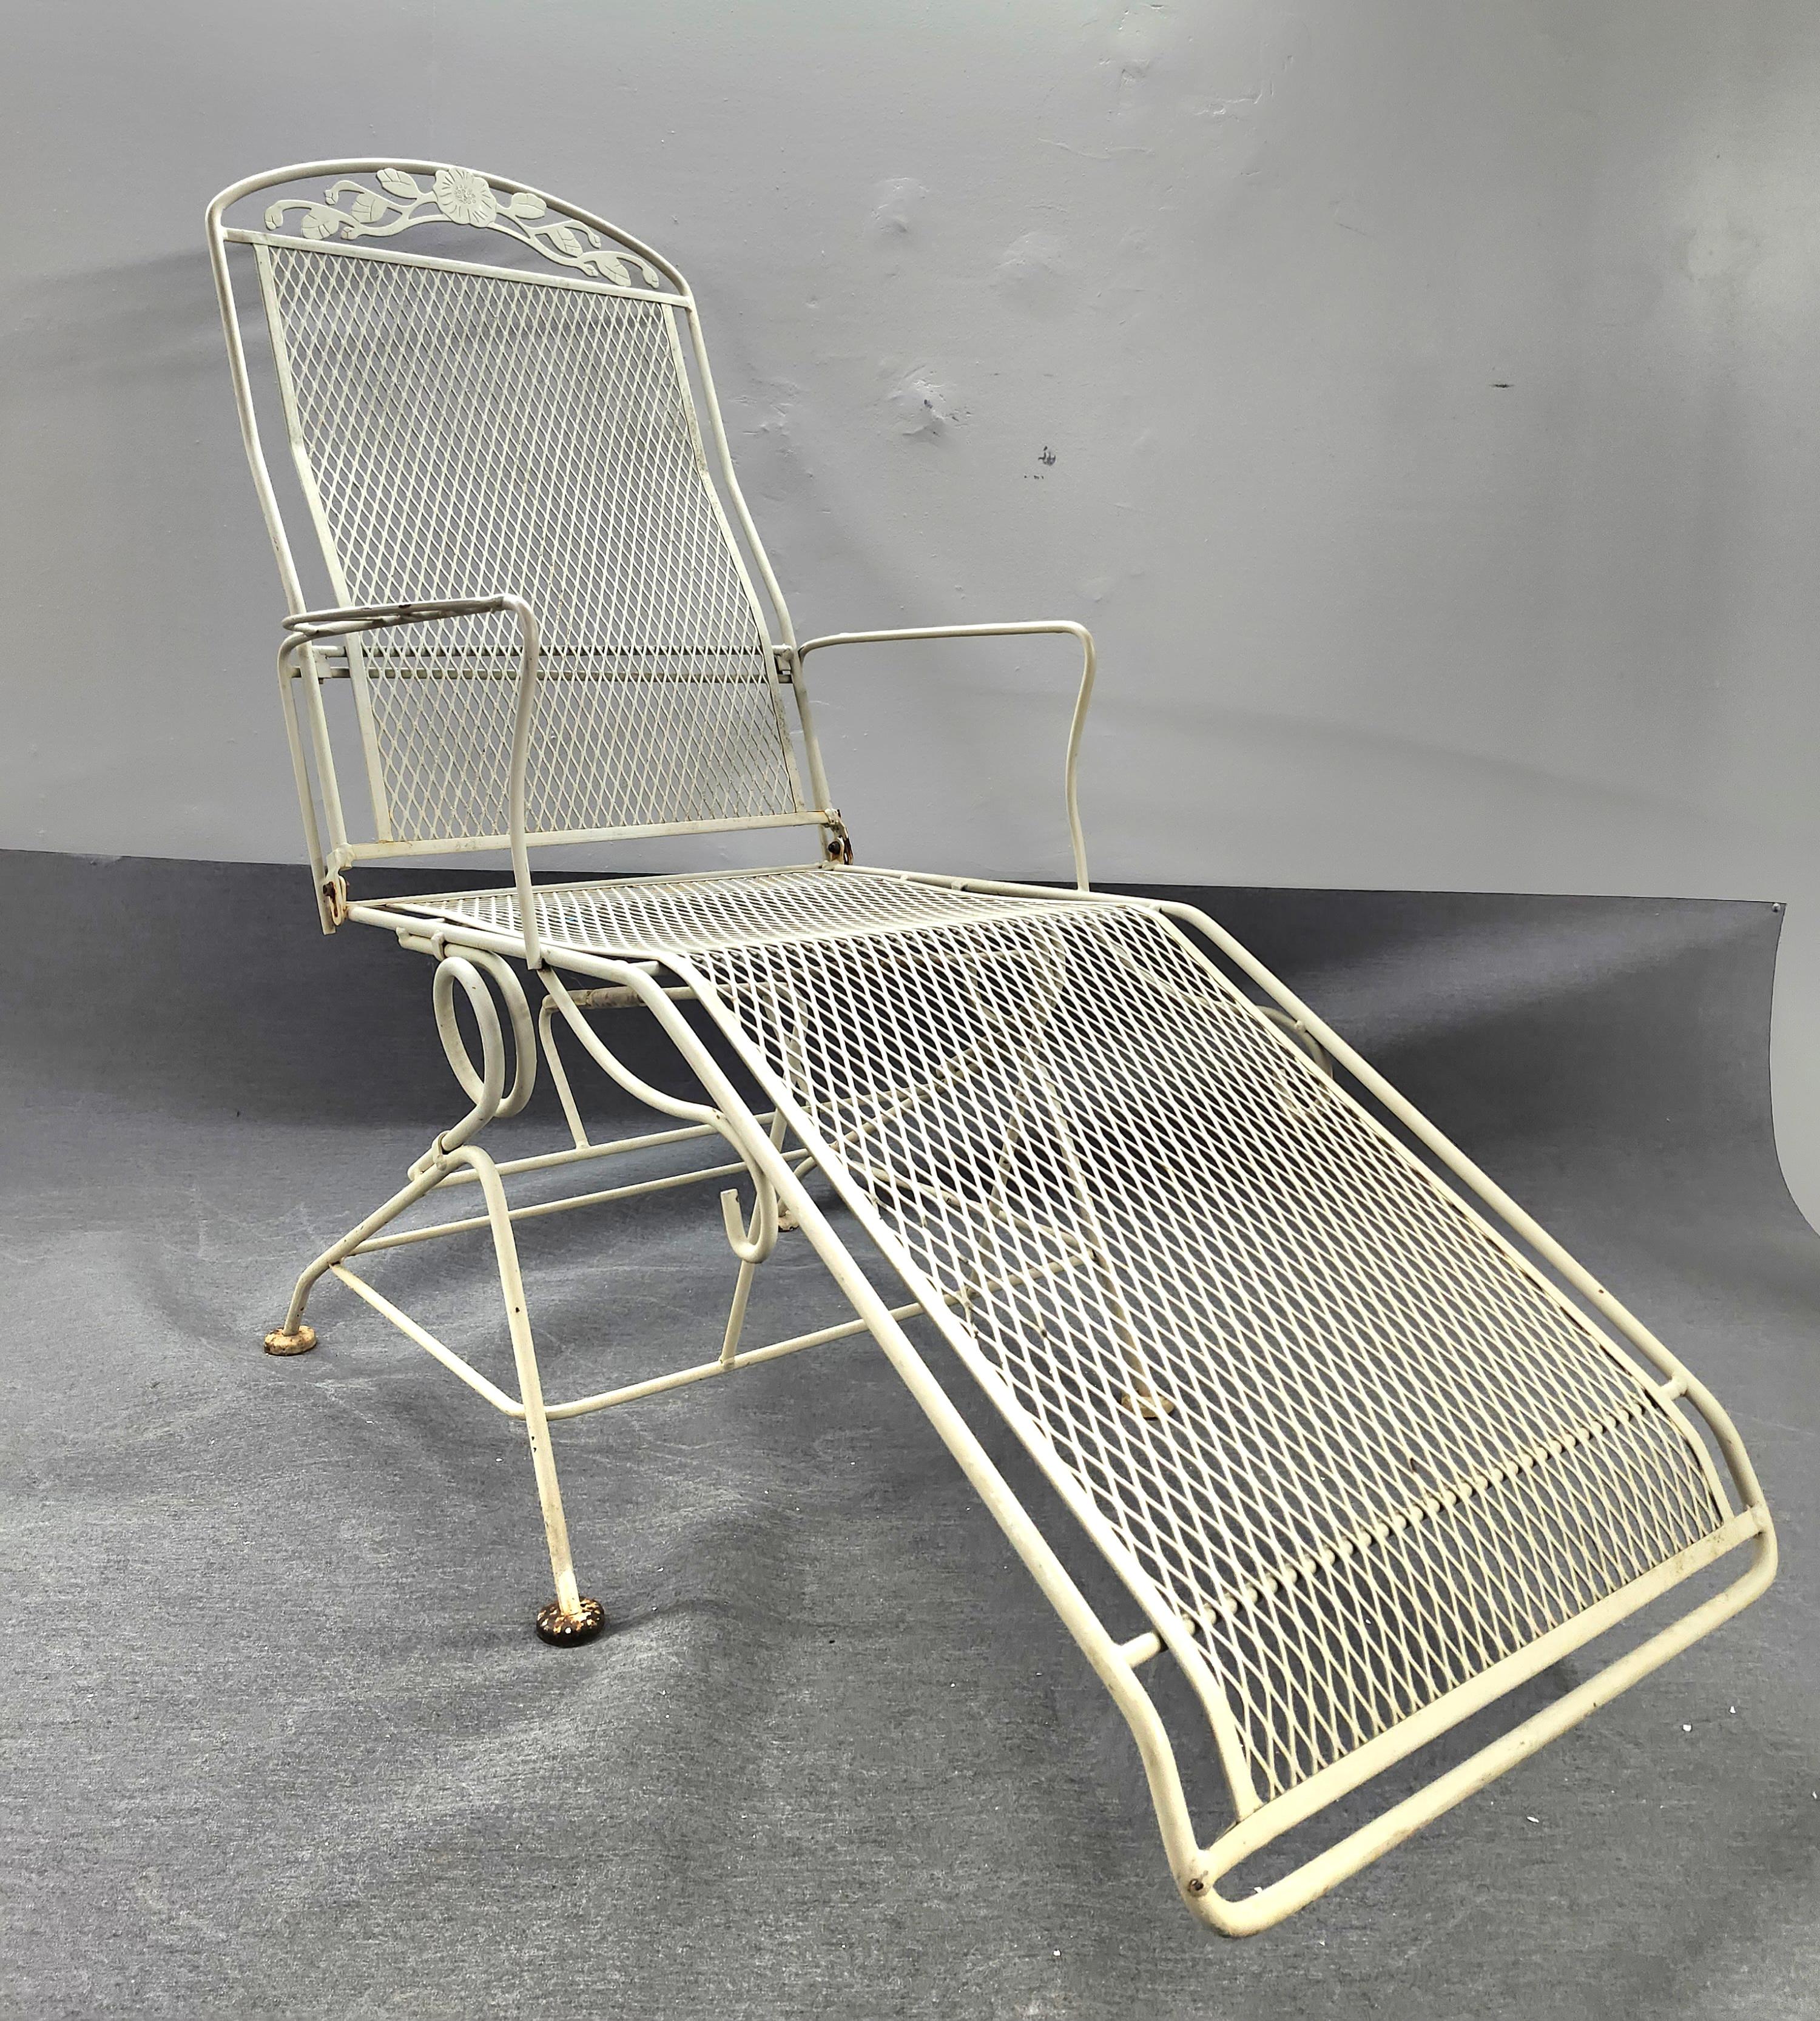 Available now for your enjoyment and ready to ship is a Vintage Wrought Iron Patio Lounge Chair made by Woodard.

This lovely Wrought Iron Chair is the perfect addition to any garden, terrace, or veranda. Enjoy a glass of lemonade in the late